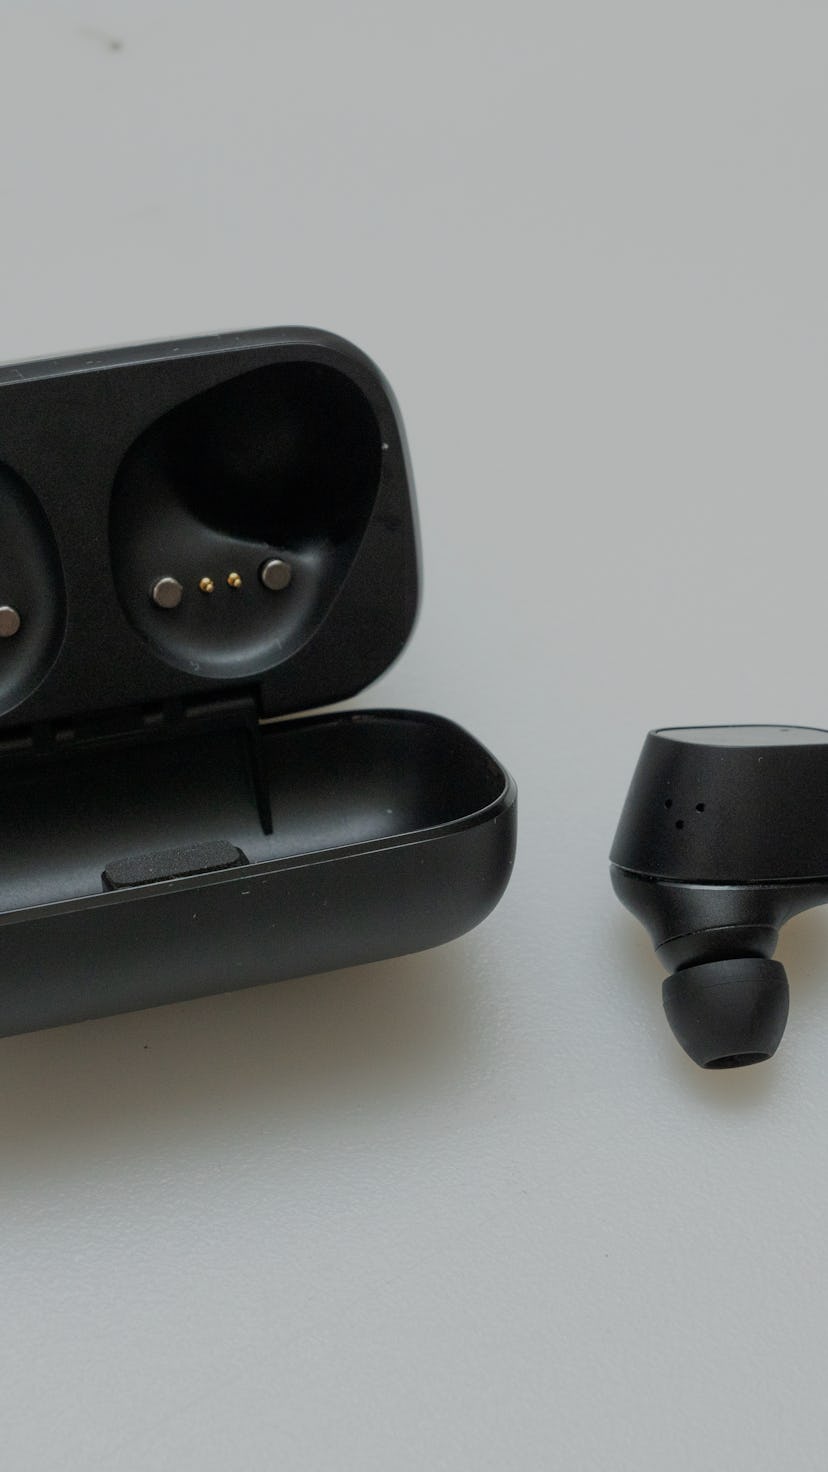 Sennheiser's CX Plus review, wireless earbuds and charging case